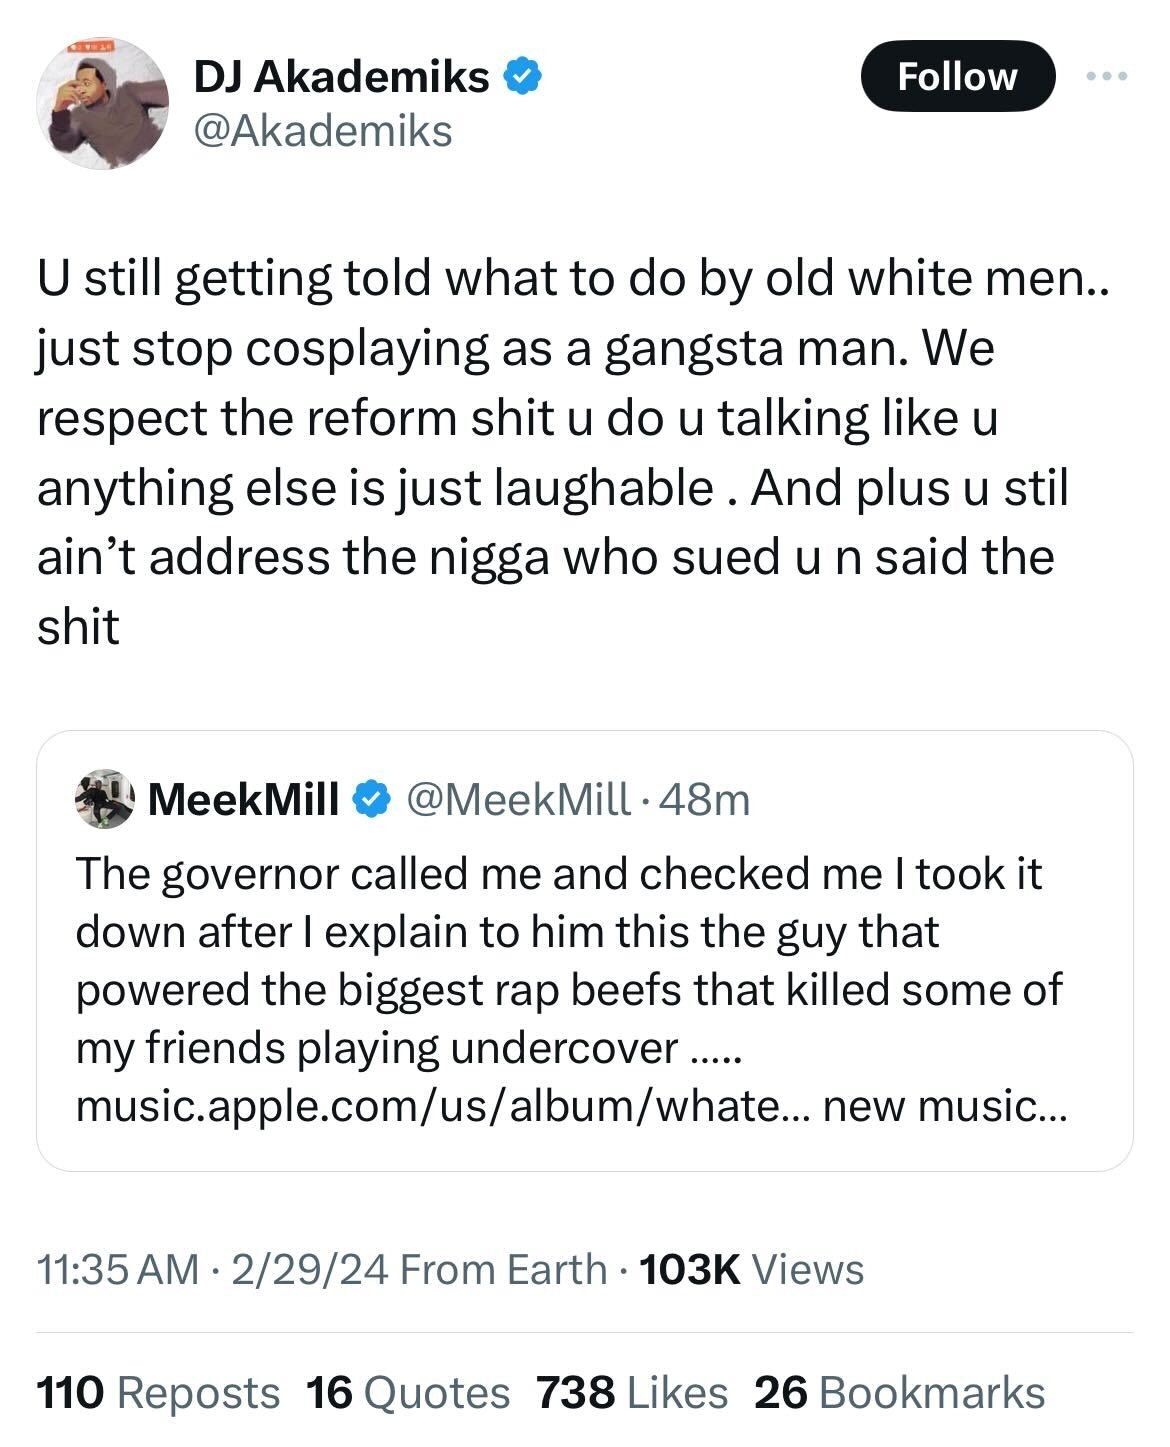 Tweet from Akademiks mocking an older person&#x27;s attempt to understand youth culture and music, with a response tweet from Meek Mill about informing a governor on new music